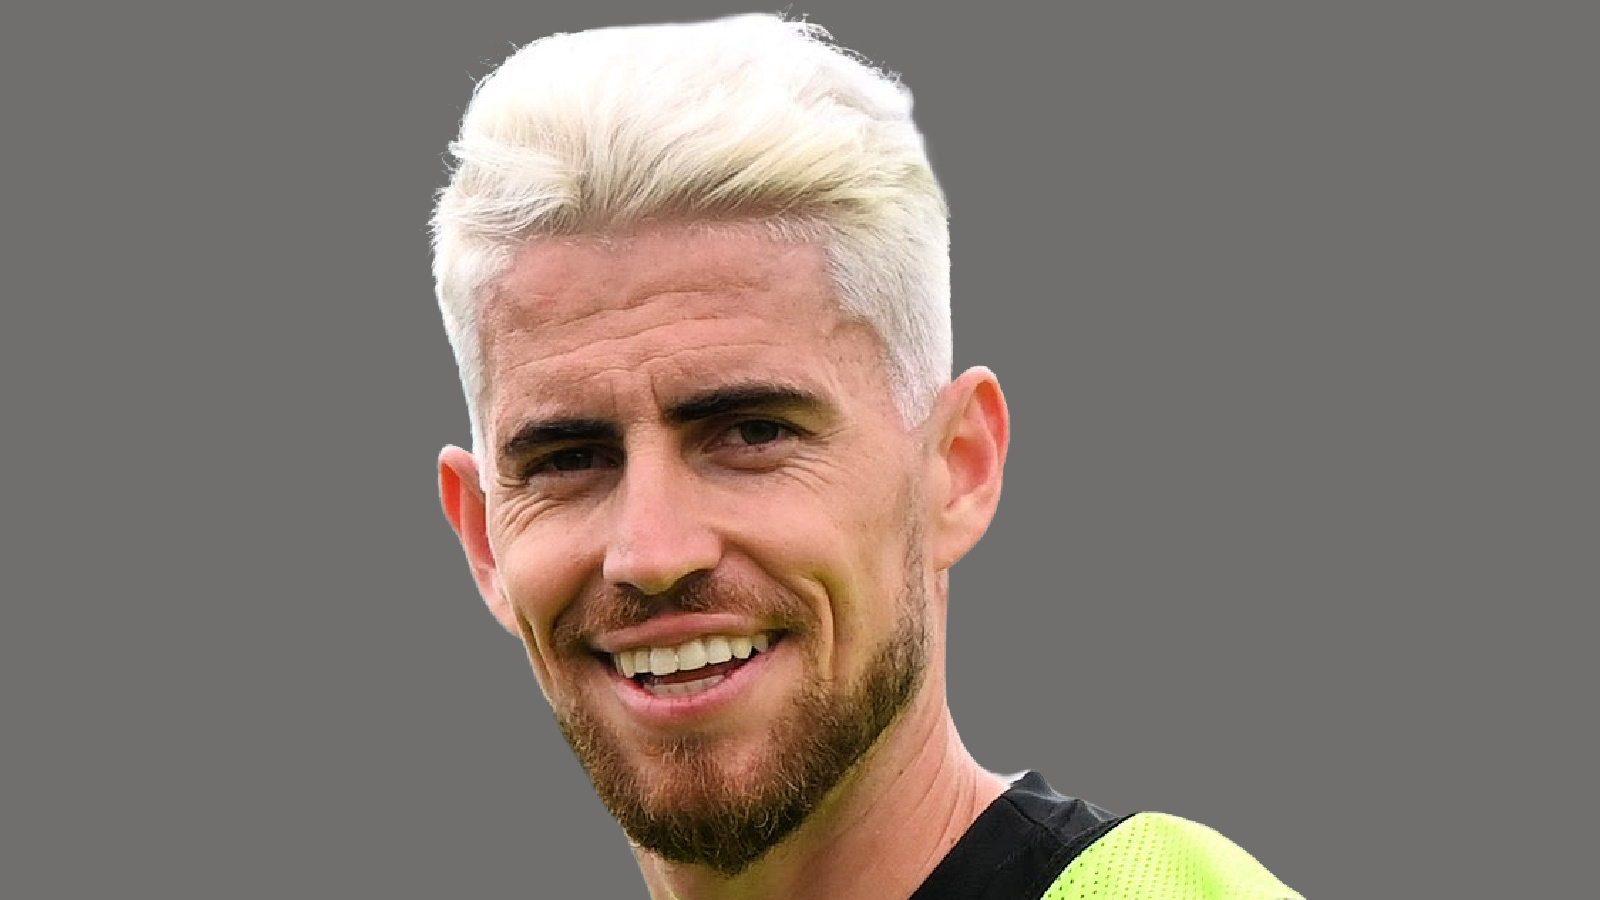 Jorginho goes ‘full Foden’ with new blonde look on his return to Chelsea